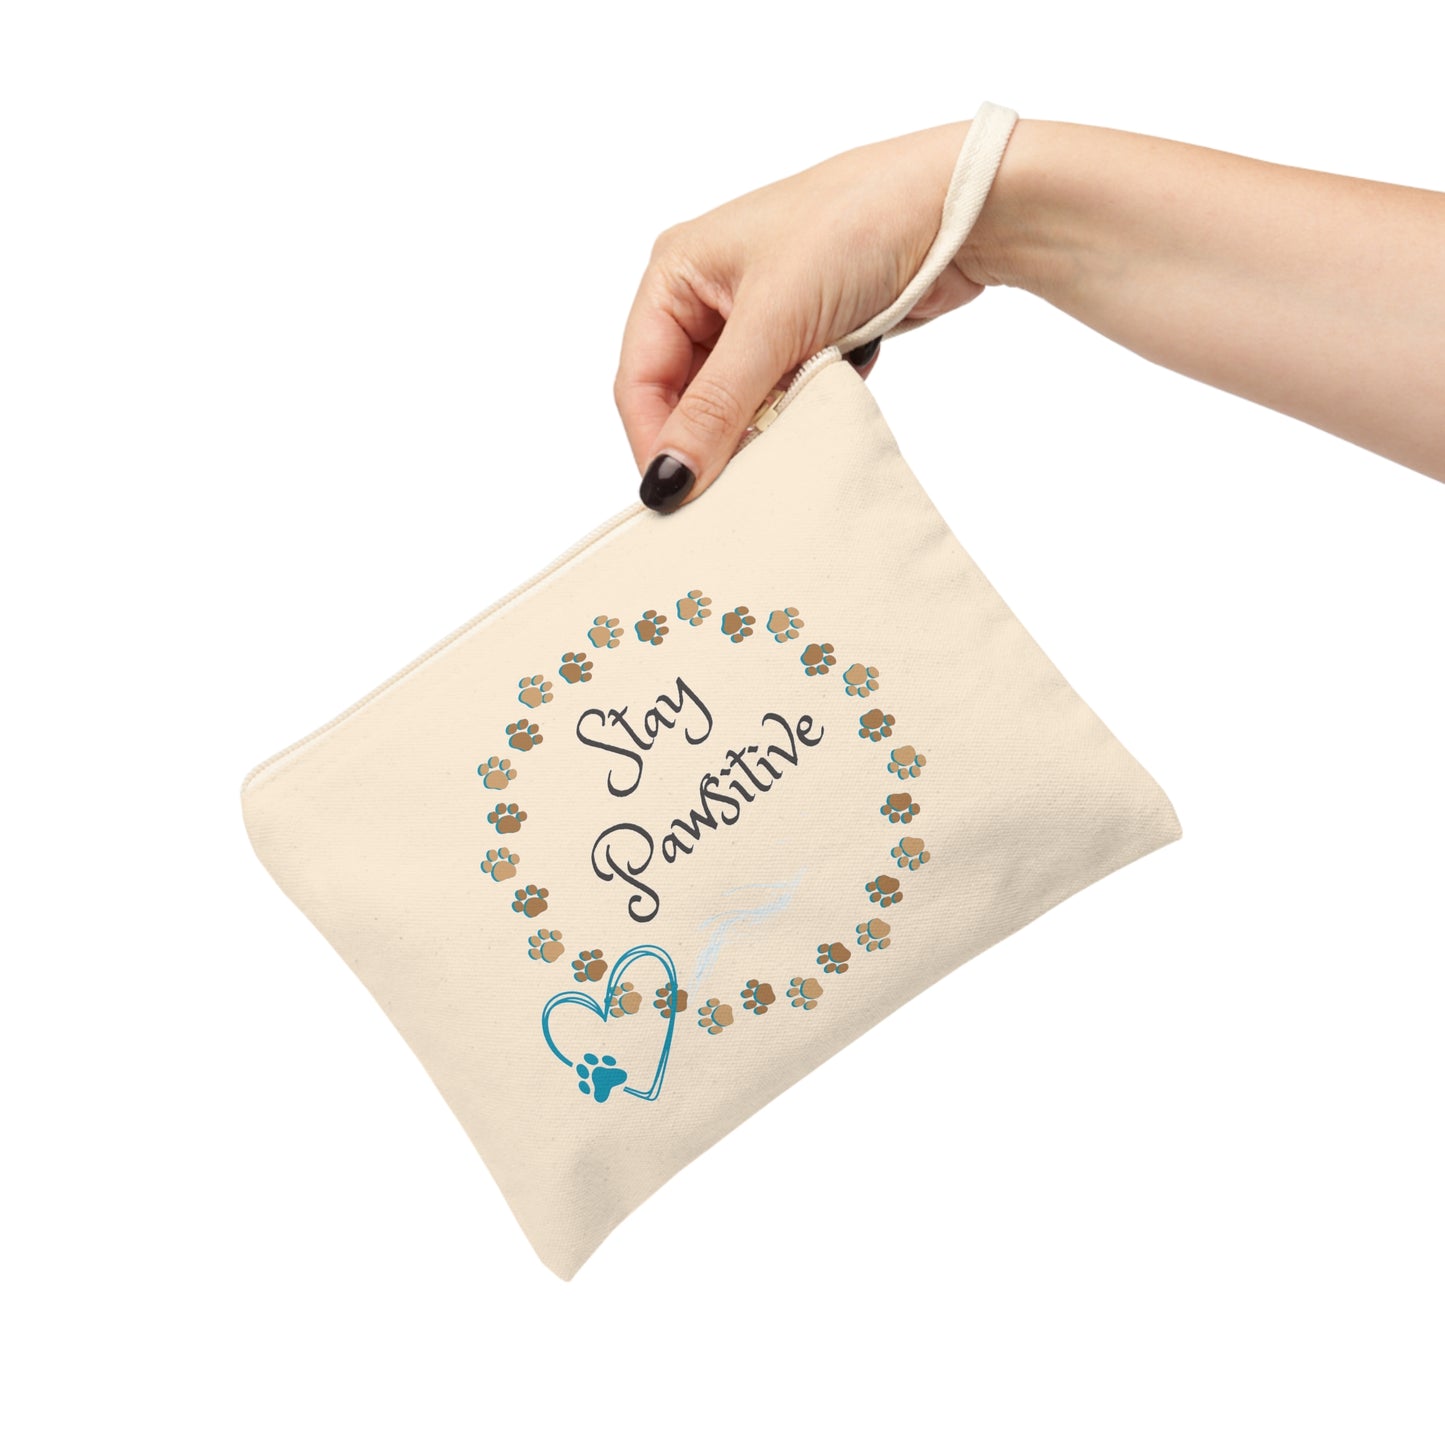 Cat Lady On-the-Go Wrist Purse -"Stay Pawsitive" slogan